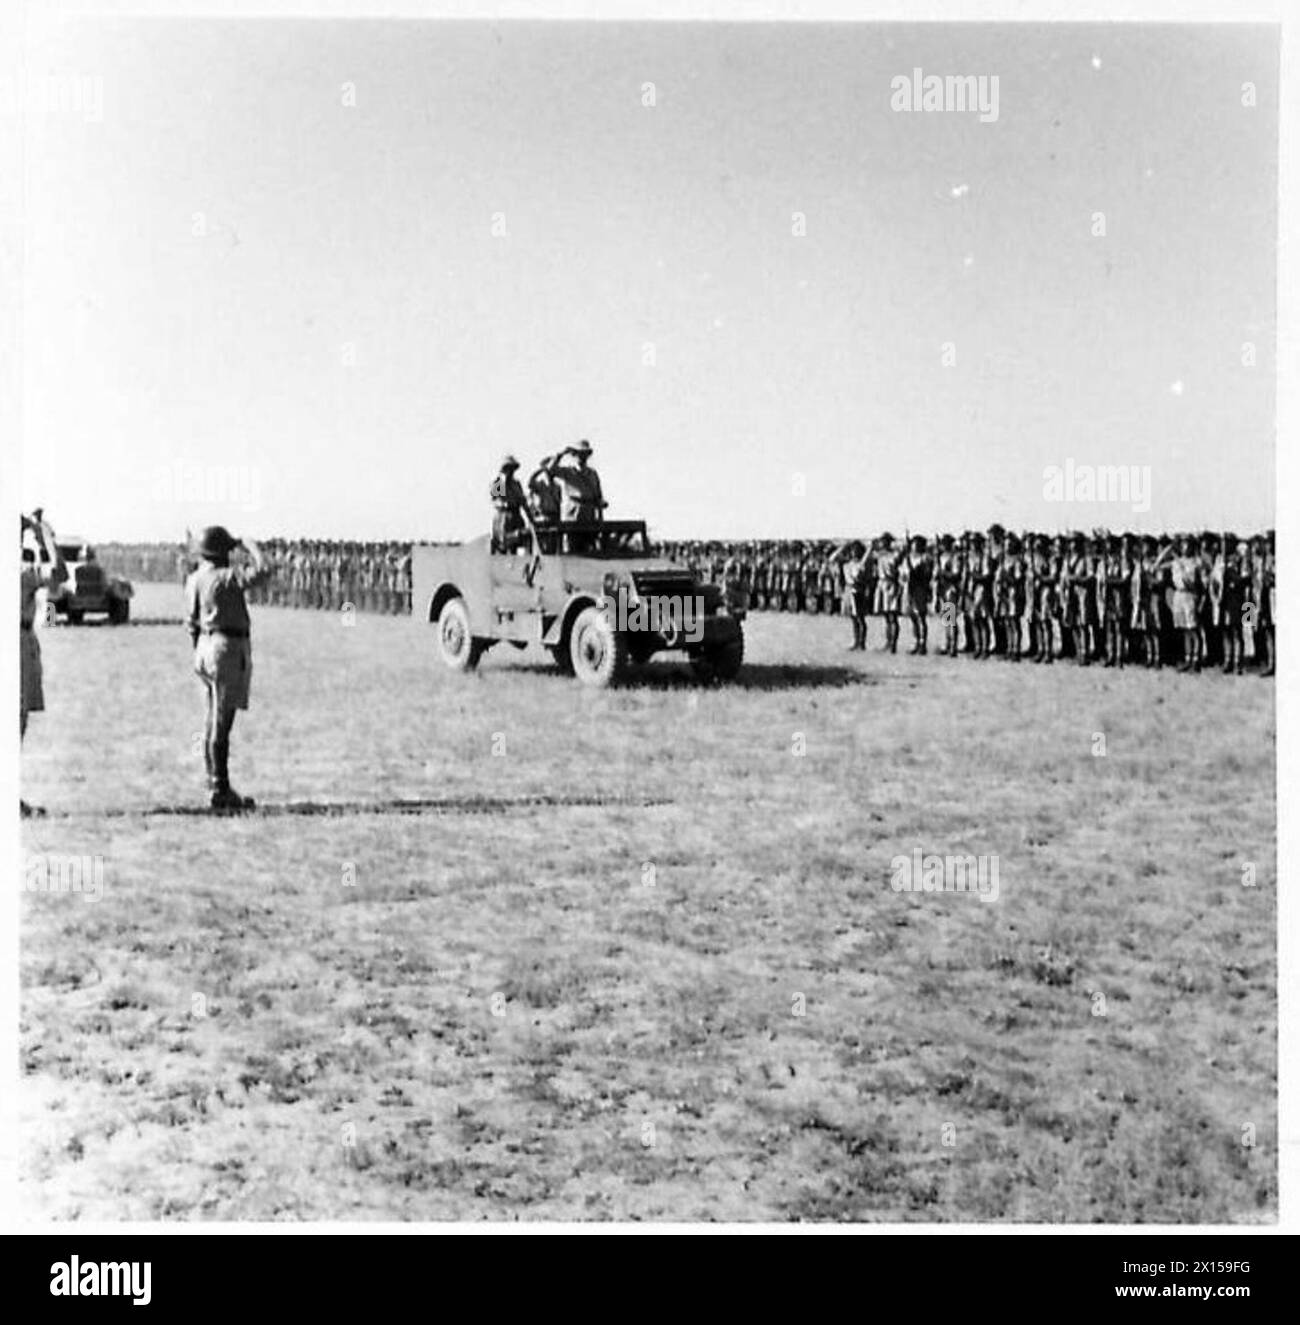 THE POLISH ARMY IN THE MIDDLE EAST, 1942-1943 - General Władysław Sikorski, the Commander-in-Chief of the Polish Armed Forces, inspecting troops of the 5th Wilno Infantry Division, a part of the Polish Army in the East (future 2nd Polish Corps). Photograph taken at the Division's camp around Kirkuk during General's official tour in Iraq Polish Army, Polish Armed Forces in the West, Polish Corps, II, Polish Armed Forces in the West, Polish Army in the Soviet Union, 5th 'Wilno' Infantry Division, Sikorski, Władysław, Anders, Władysław Stock Photo